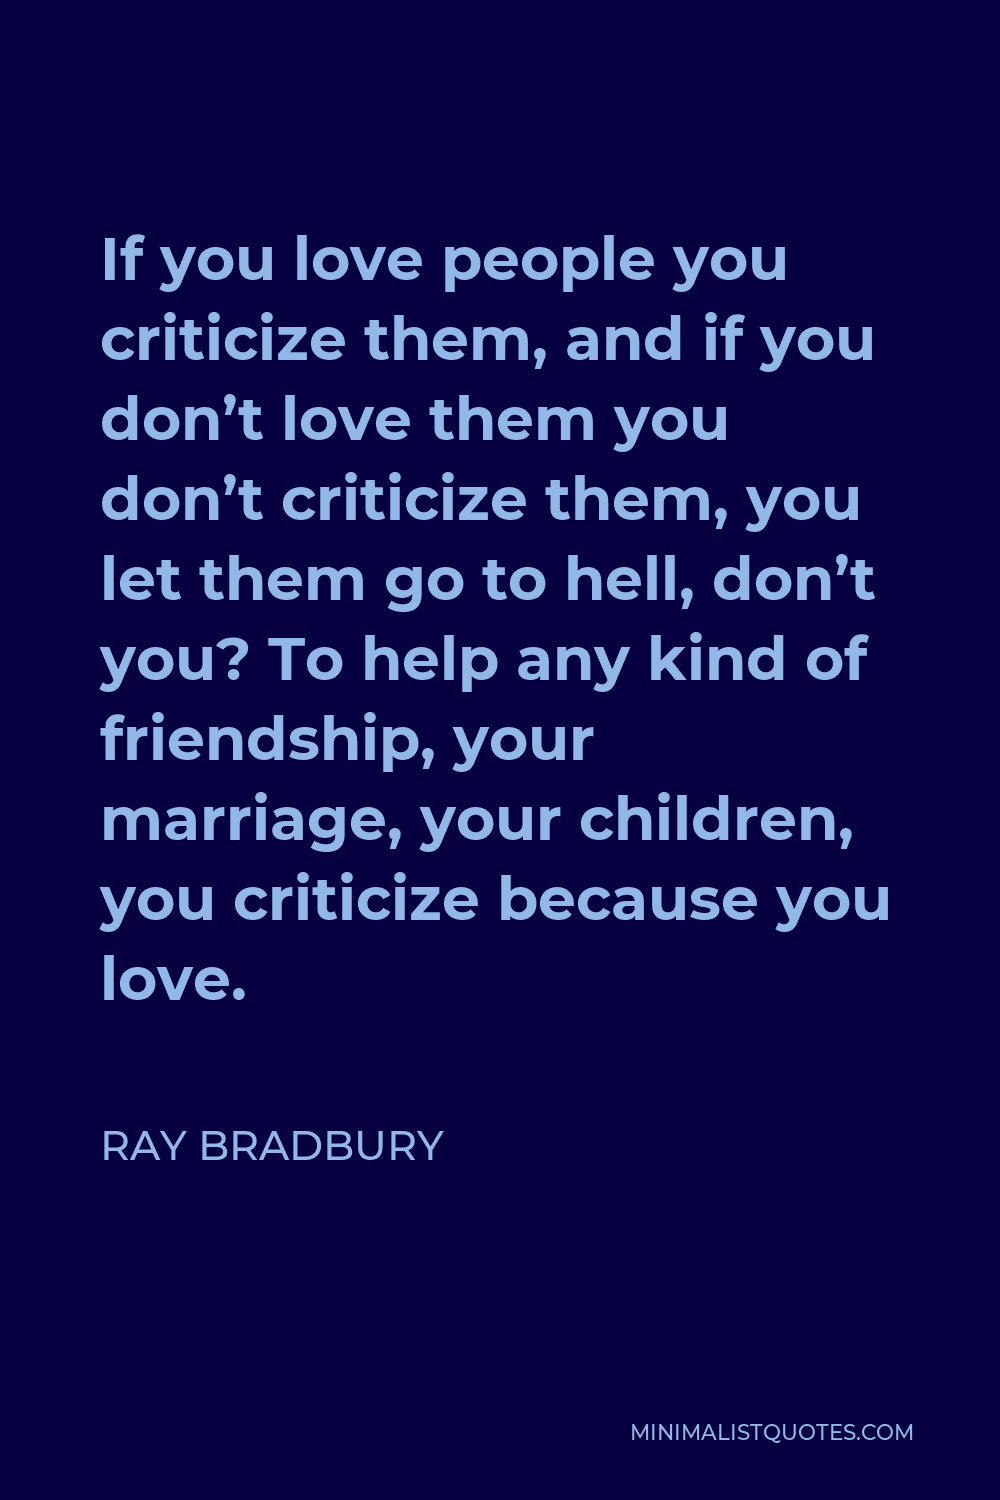 Ray Bradbury Quote - If you love people you criticize them, and if you don’t love them you don’t criticize them, you let them go to hell, don’t you? To help any kind of friendship, your marriage, your children, you criticize because you love.